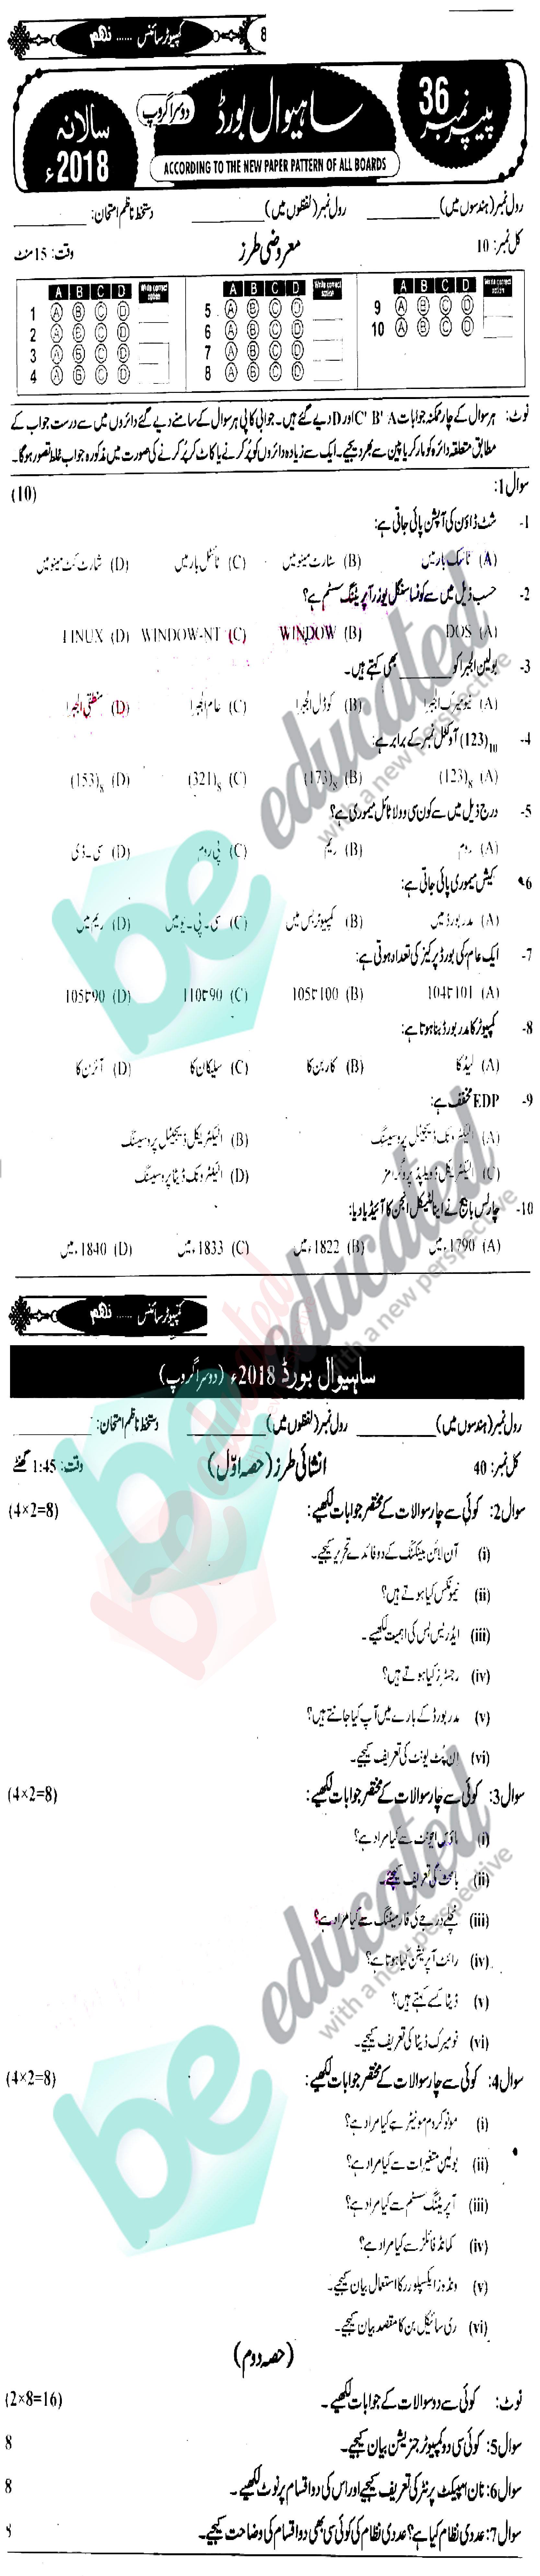 Computer Science 9th class Past Paper Group 2 BISE Sahiwal 2018